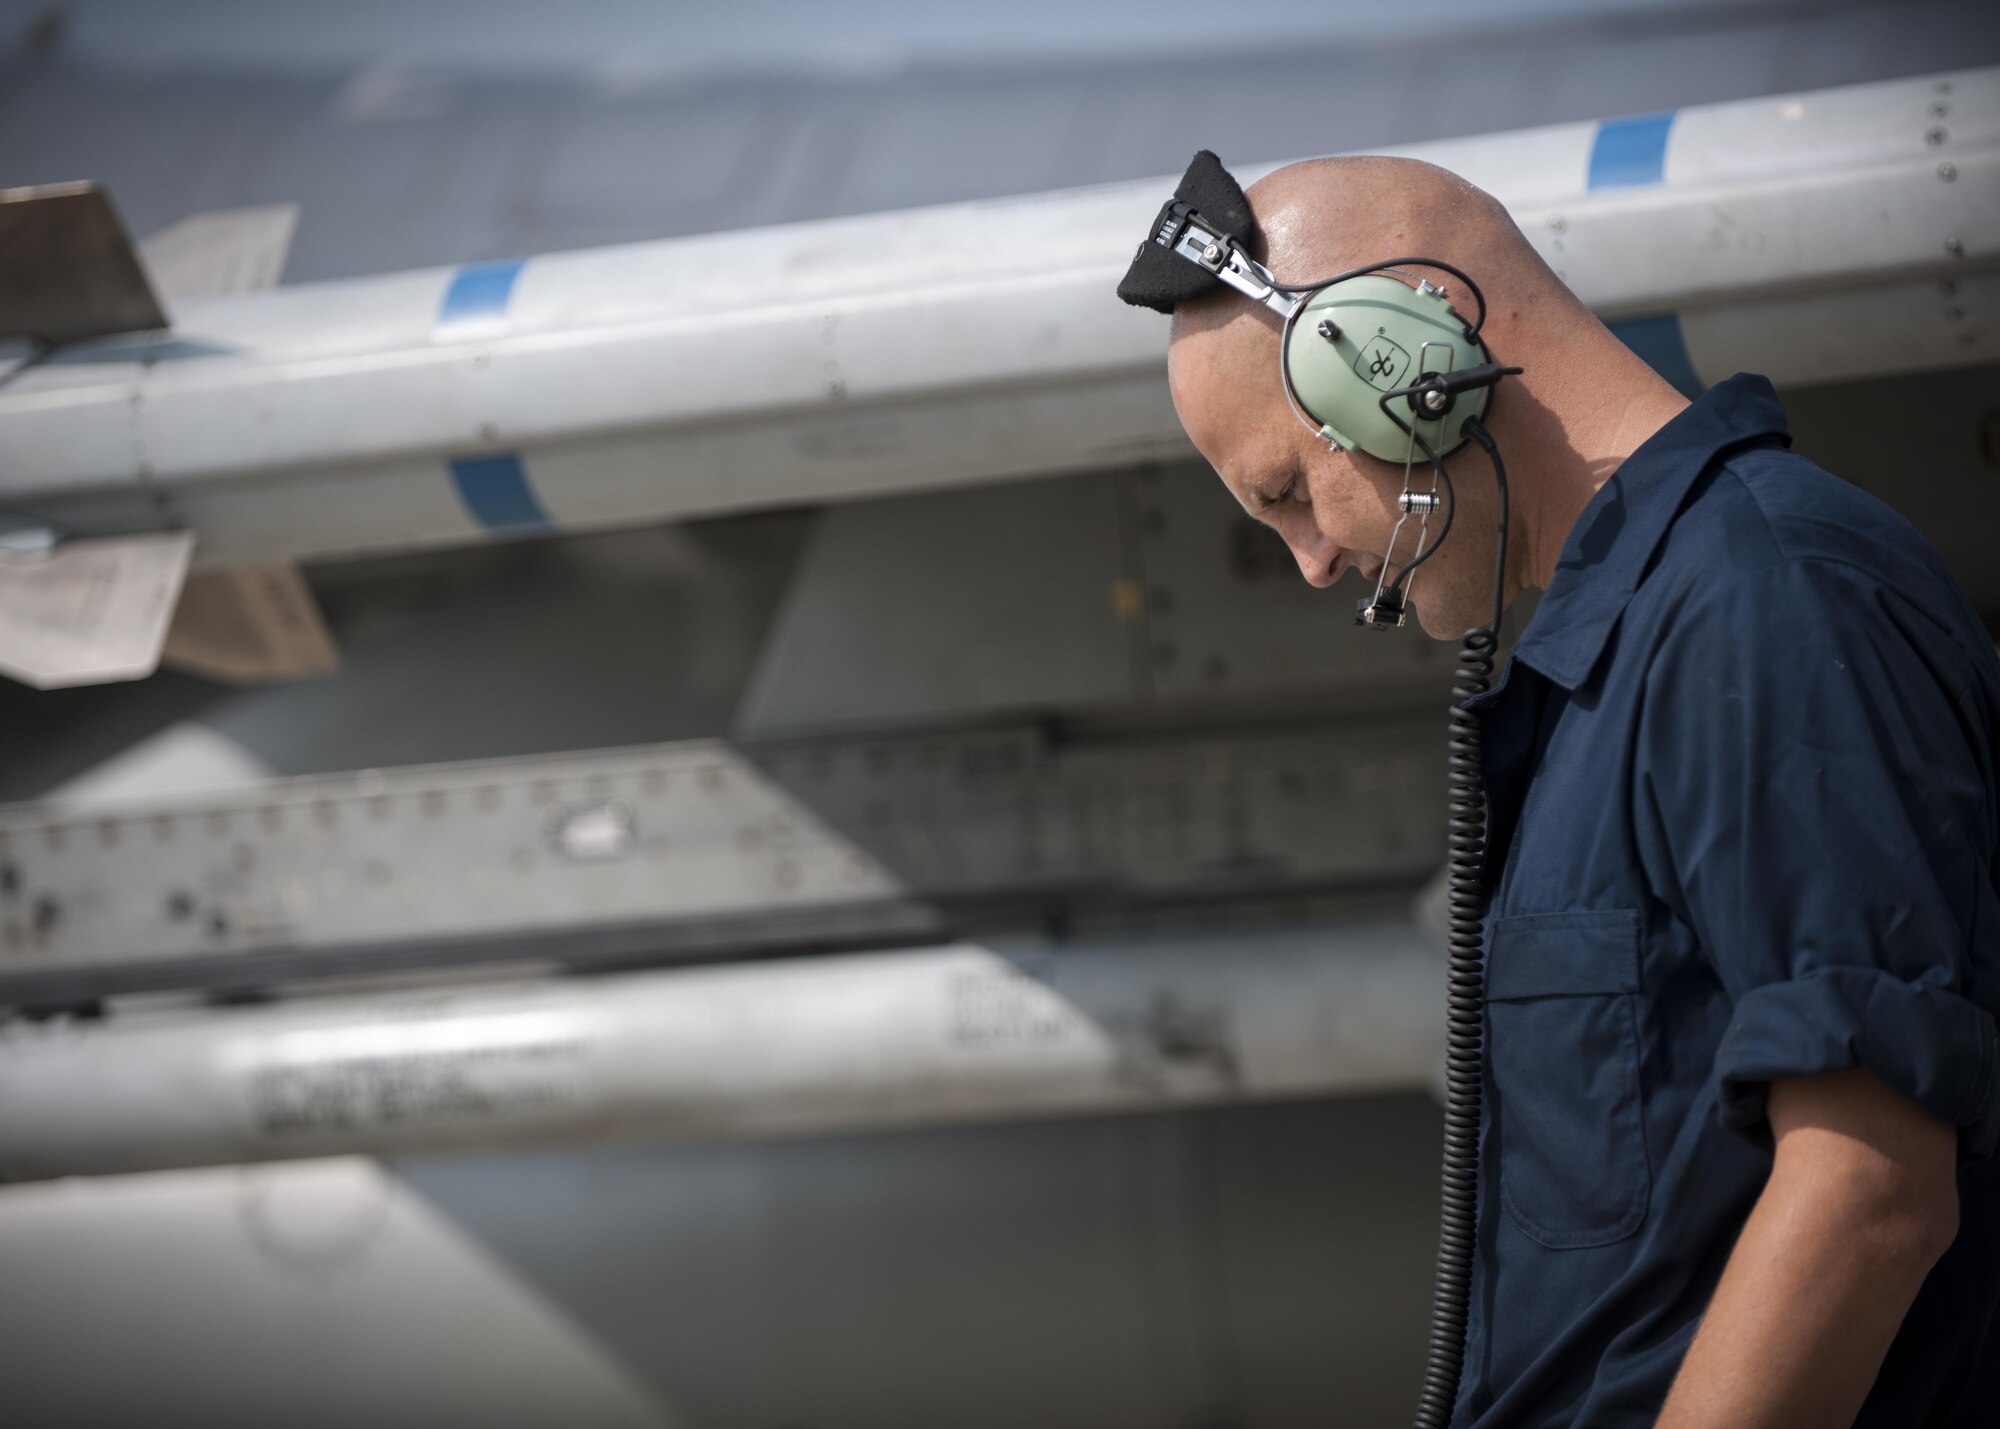 U.S. Air Force Staff Sgt. Eugene Travis, 8th Air Maintenance Squadron crew chief, prepares to launch a jet while participating in the “Job Swap” event at Kunsan Air Base, Republic of Korea, Sept. 12, 2017. The week-long event was to give 8th SFS defenders a better look at the assets that they are protecting day in and day out. (U.S. Air Force photo by Staff Sgt. Victoria H. Taylor)